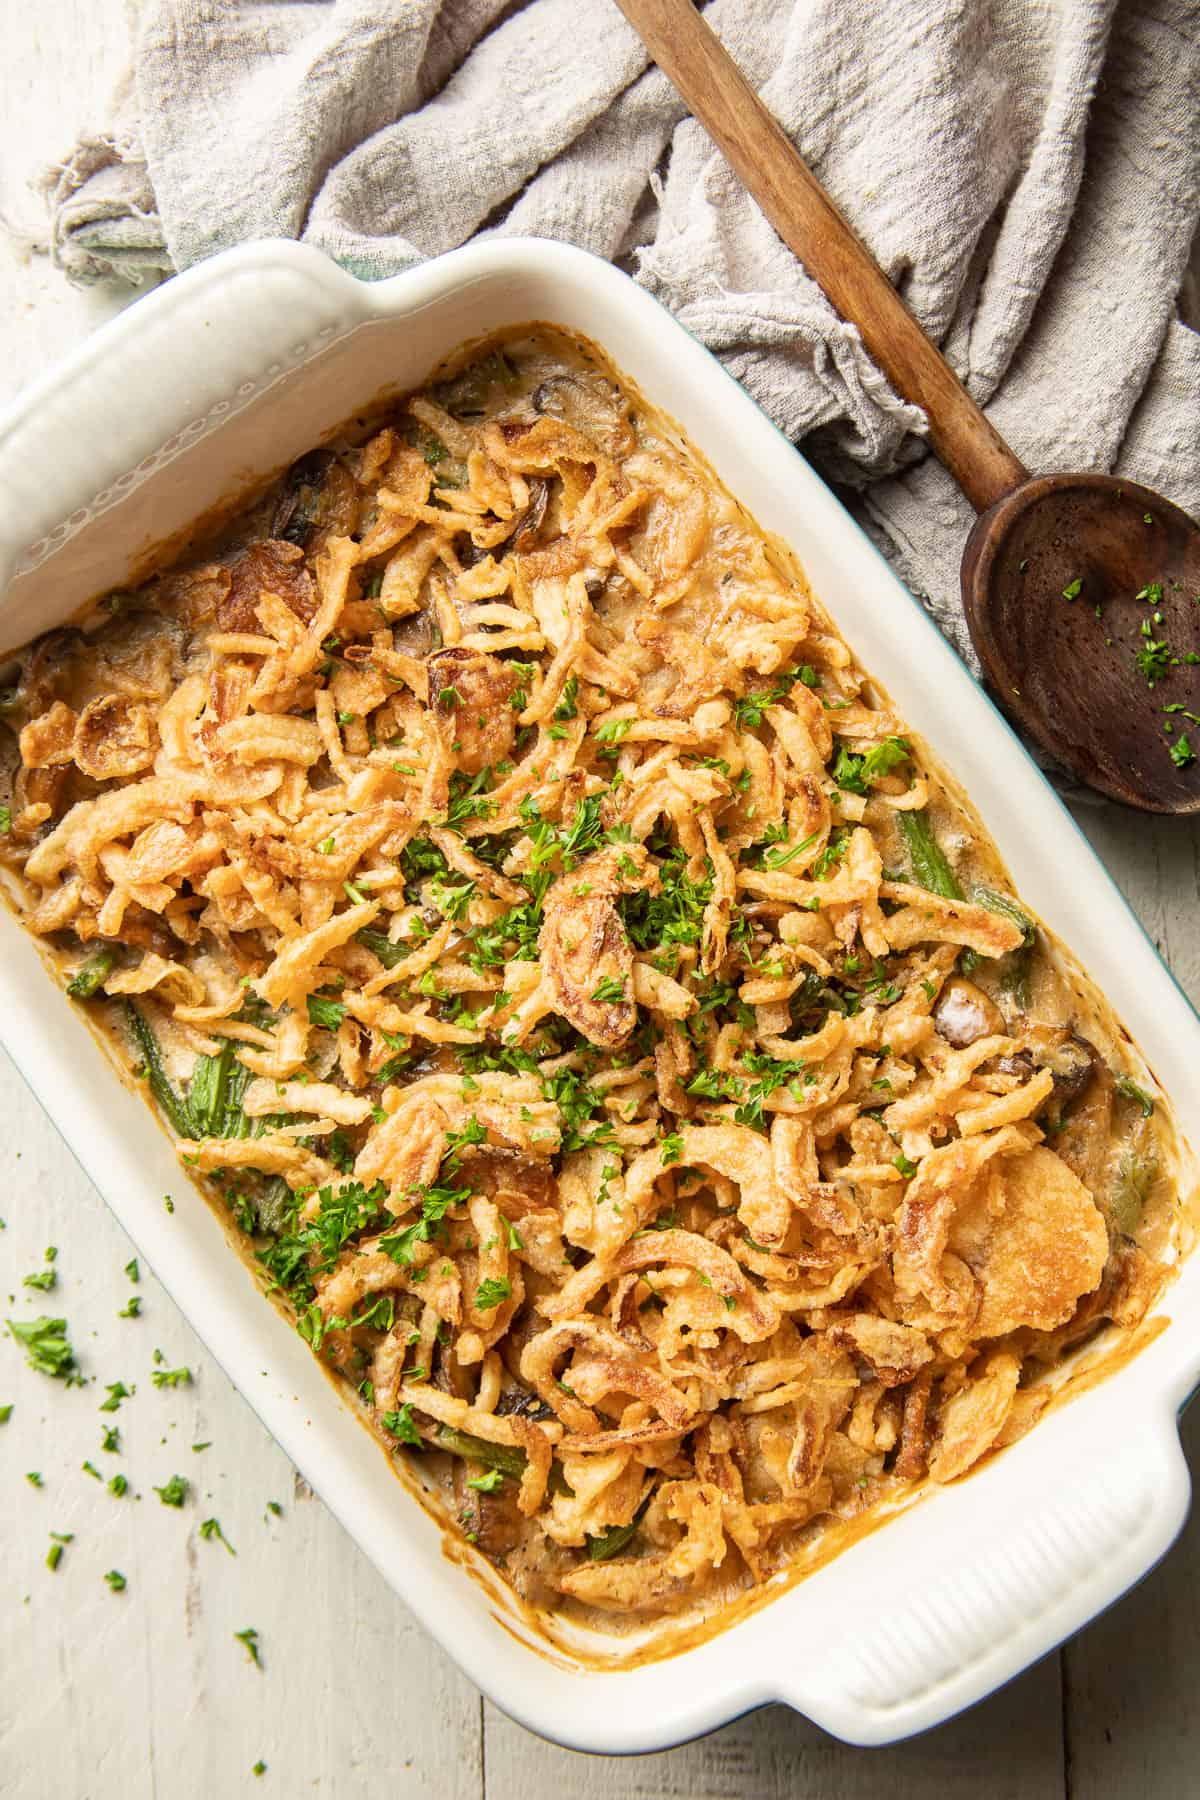 Dish of Vegan Green Bean Casserole on a white wooden surface with wooden spoon on the side.